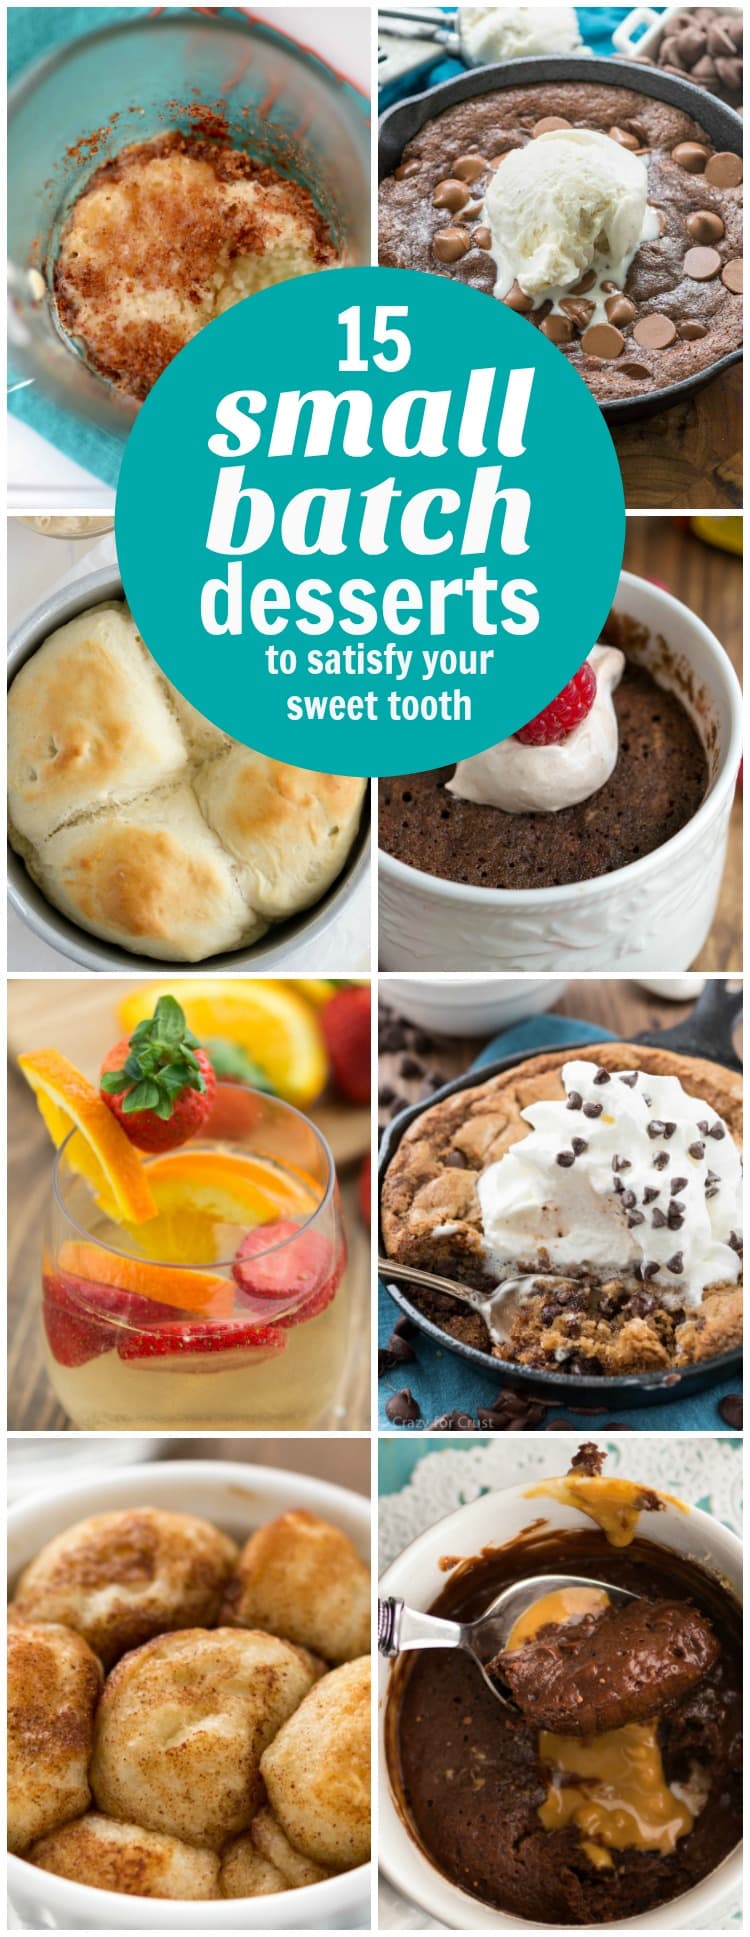 Small Batch Dessert Recipes to satisfy your sweet tooth in a BIG WAY. Cookies, cake, brownies, sangria, monkey bread...everything in single-serve size!